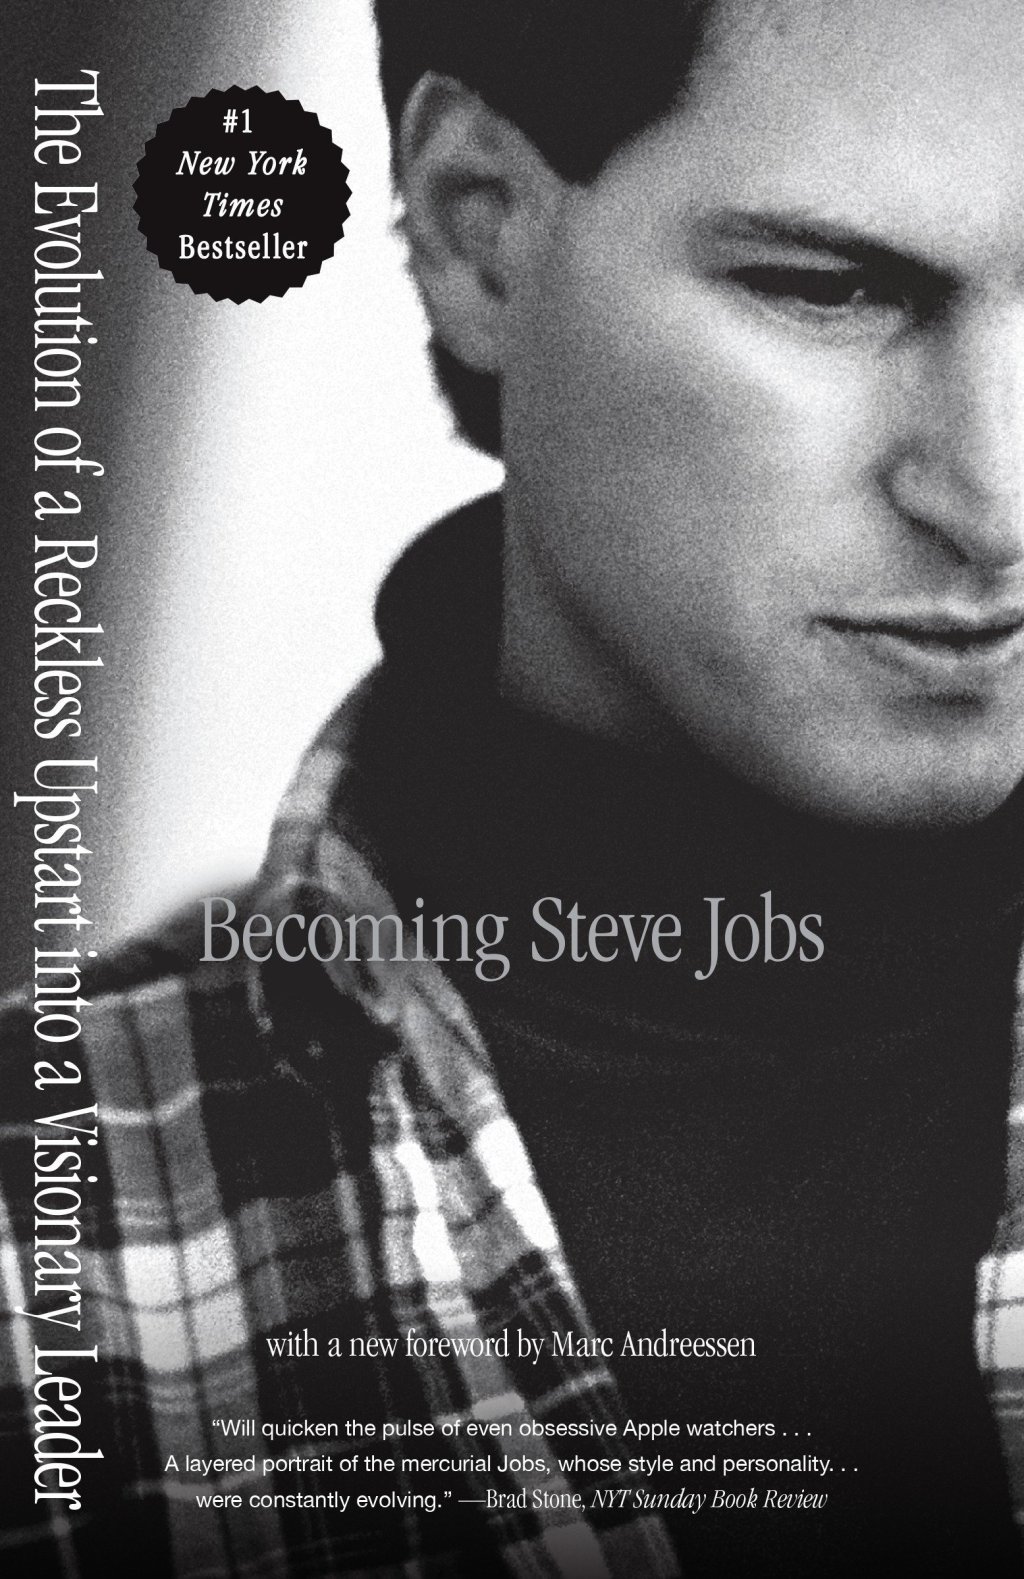 Three lessons for your business from Steve Jobs